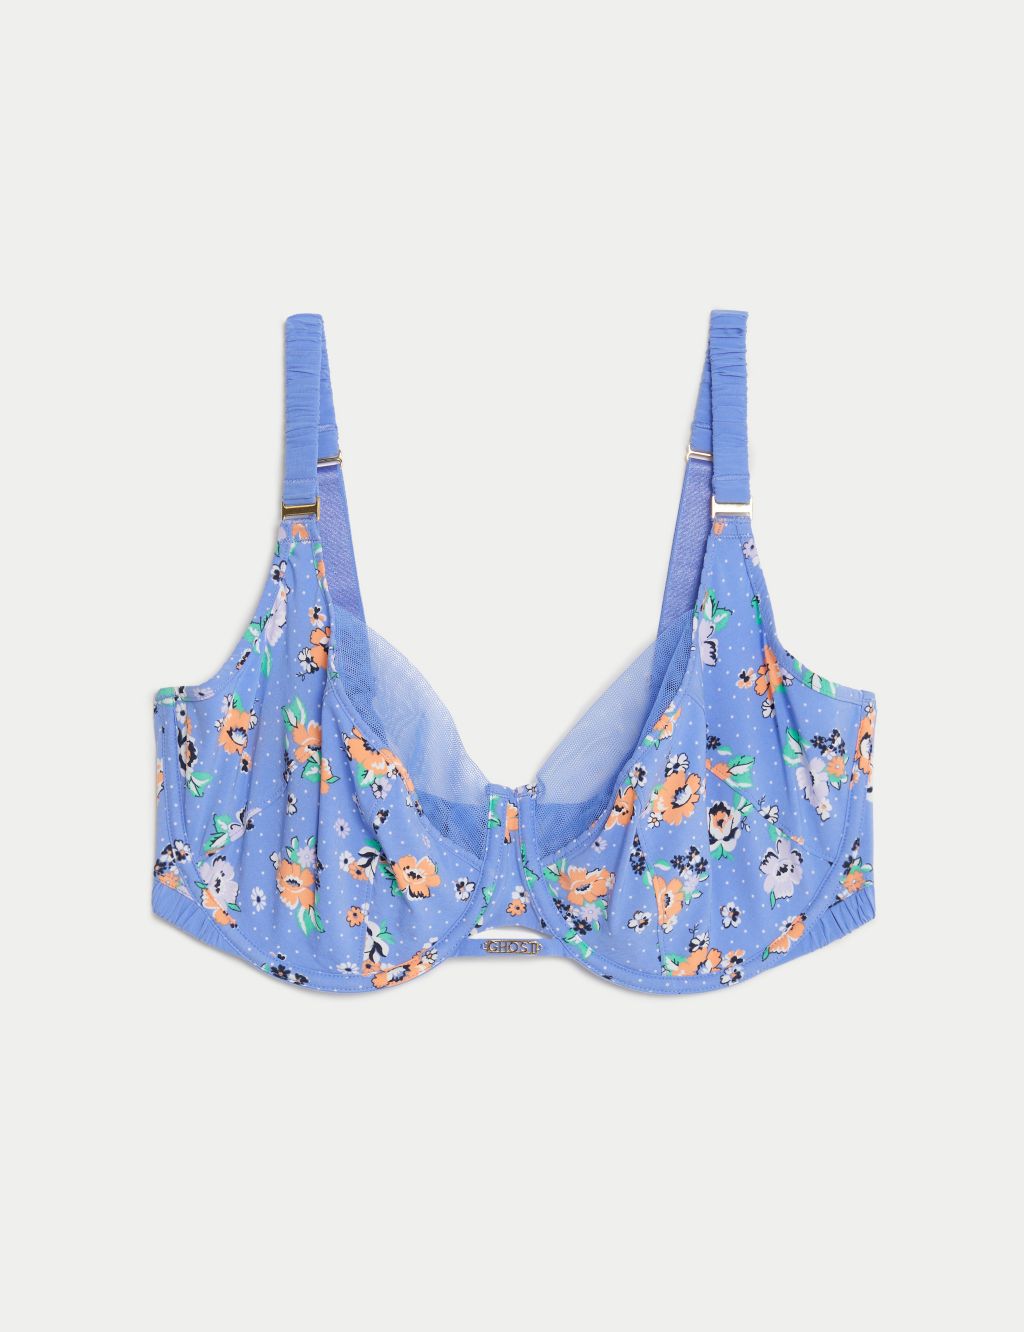 Marie Print Wired Full Cup Bra (F-H) image 2